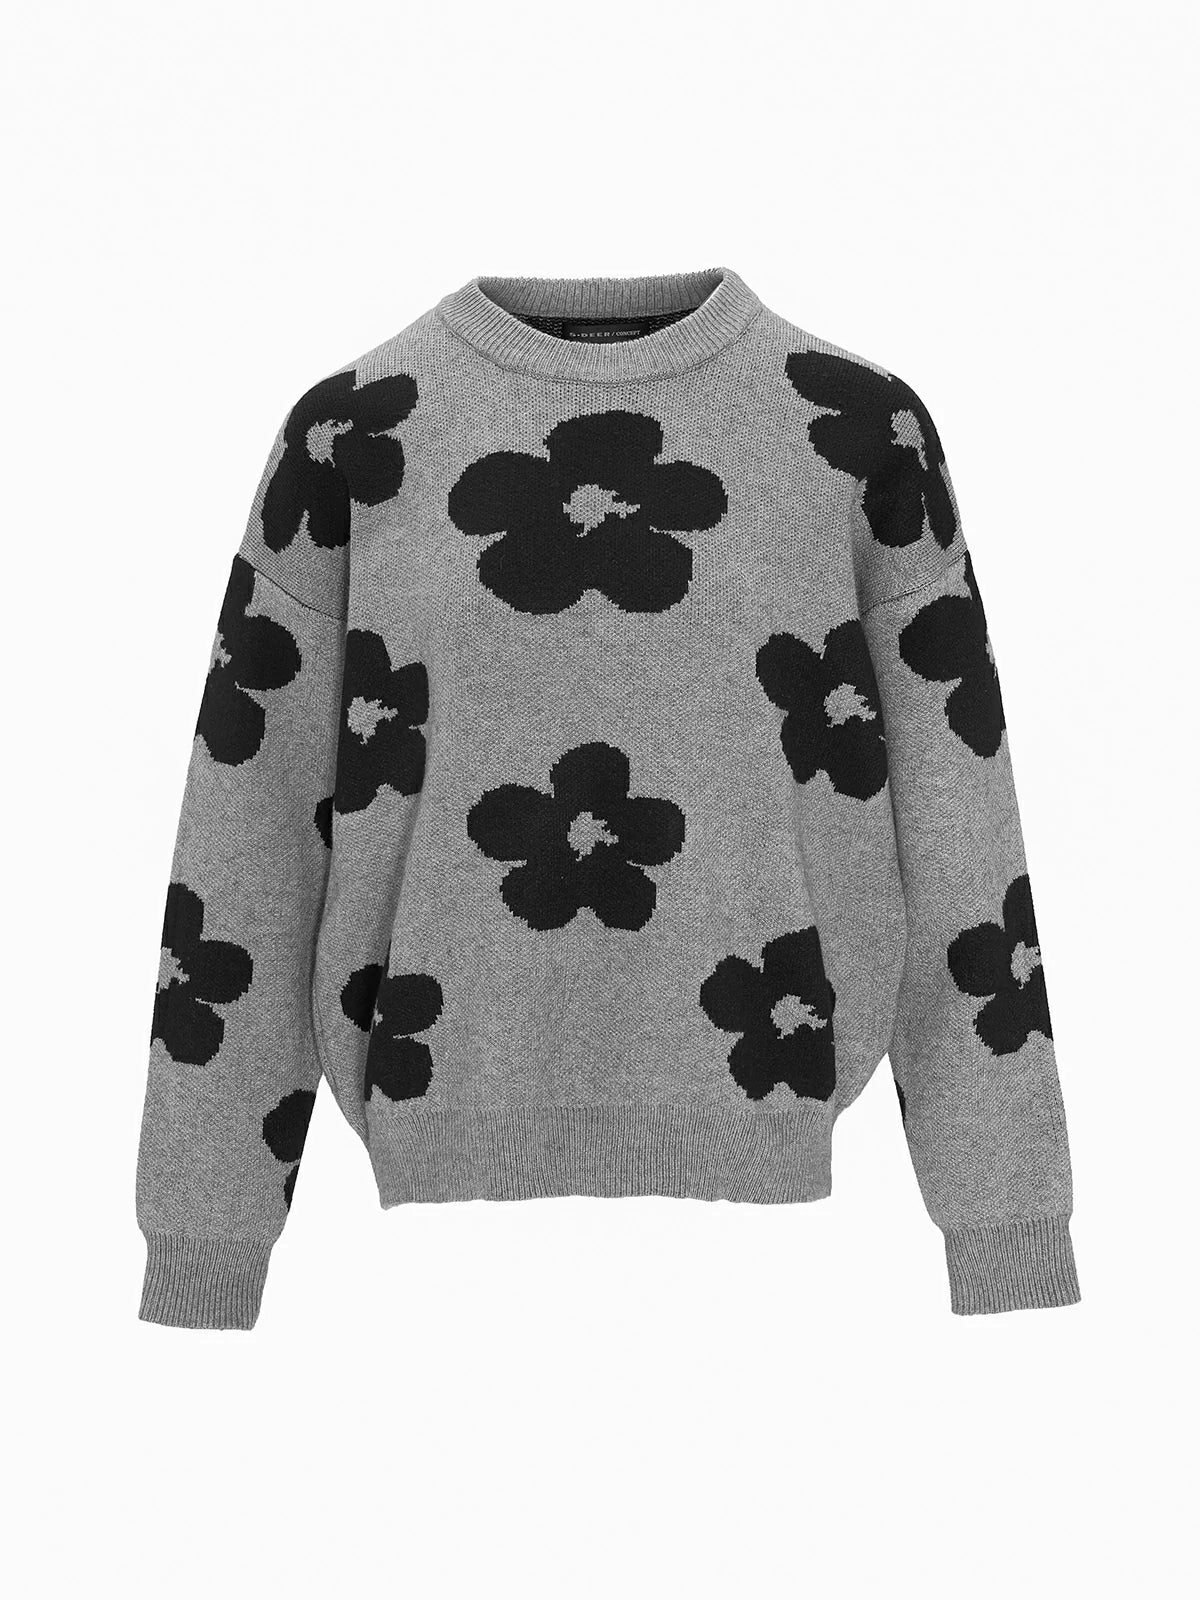 Explore endless styling possibilities with a loose-fit gray sweater adorned with a charming floral print.